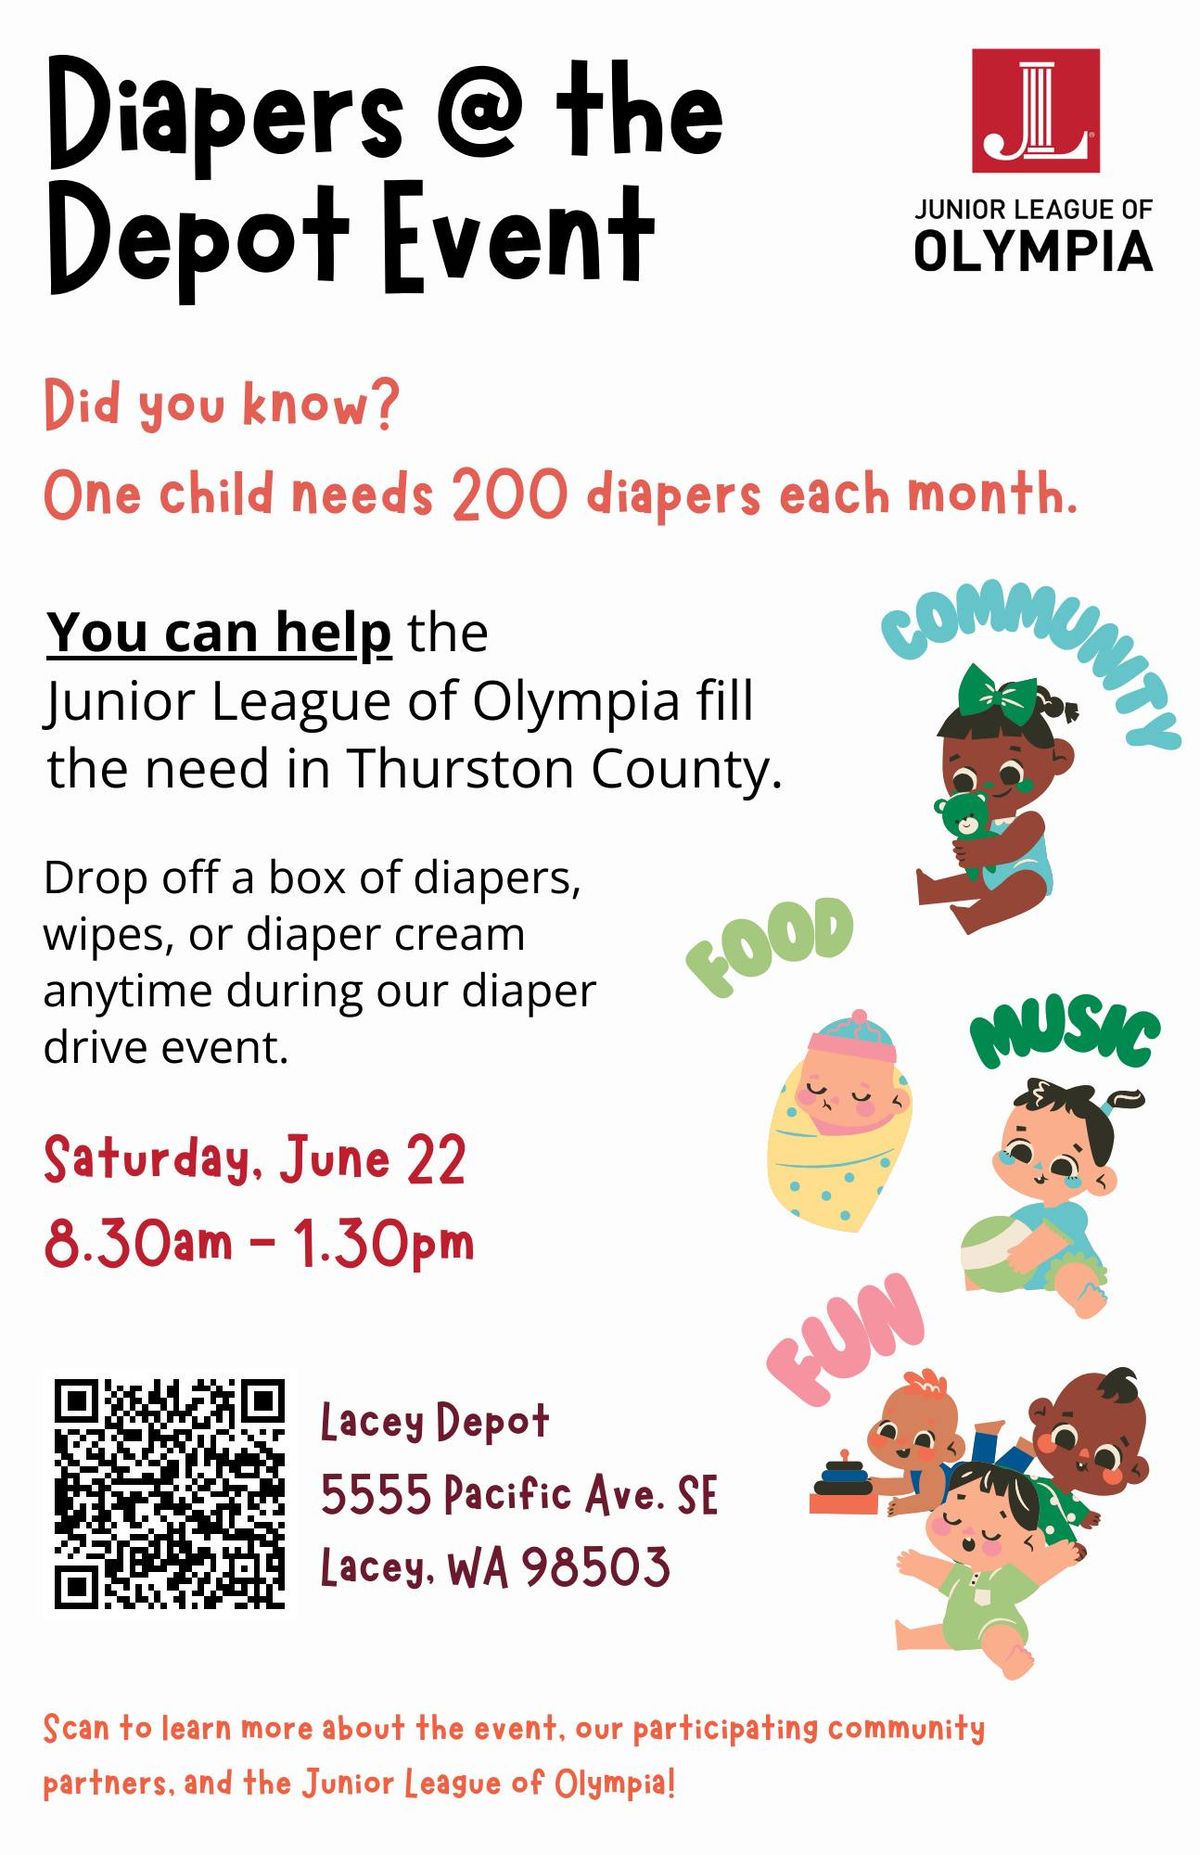 Diapers at the Depot by the Junior League of Olympia